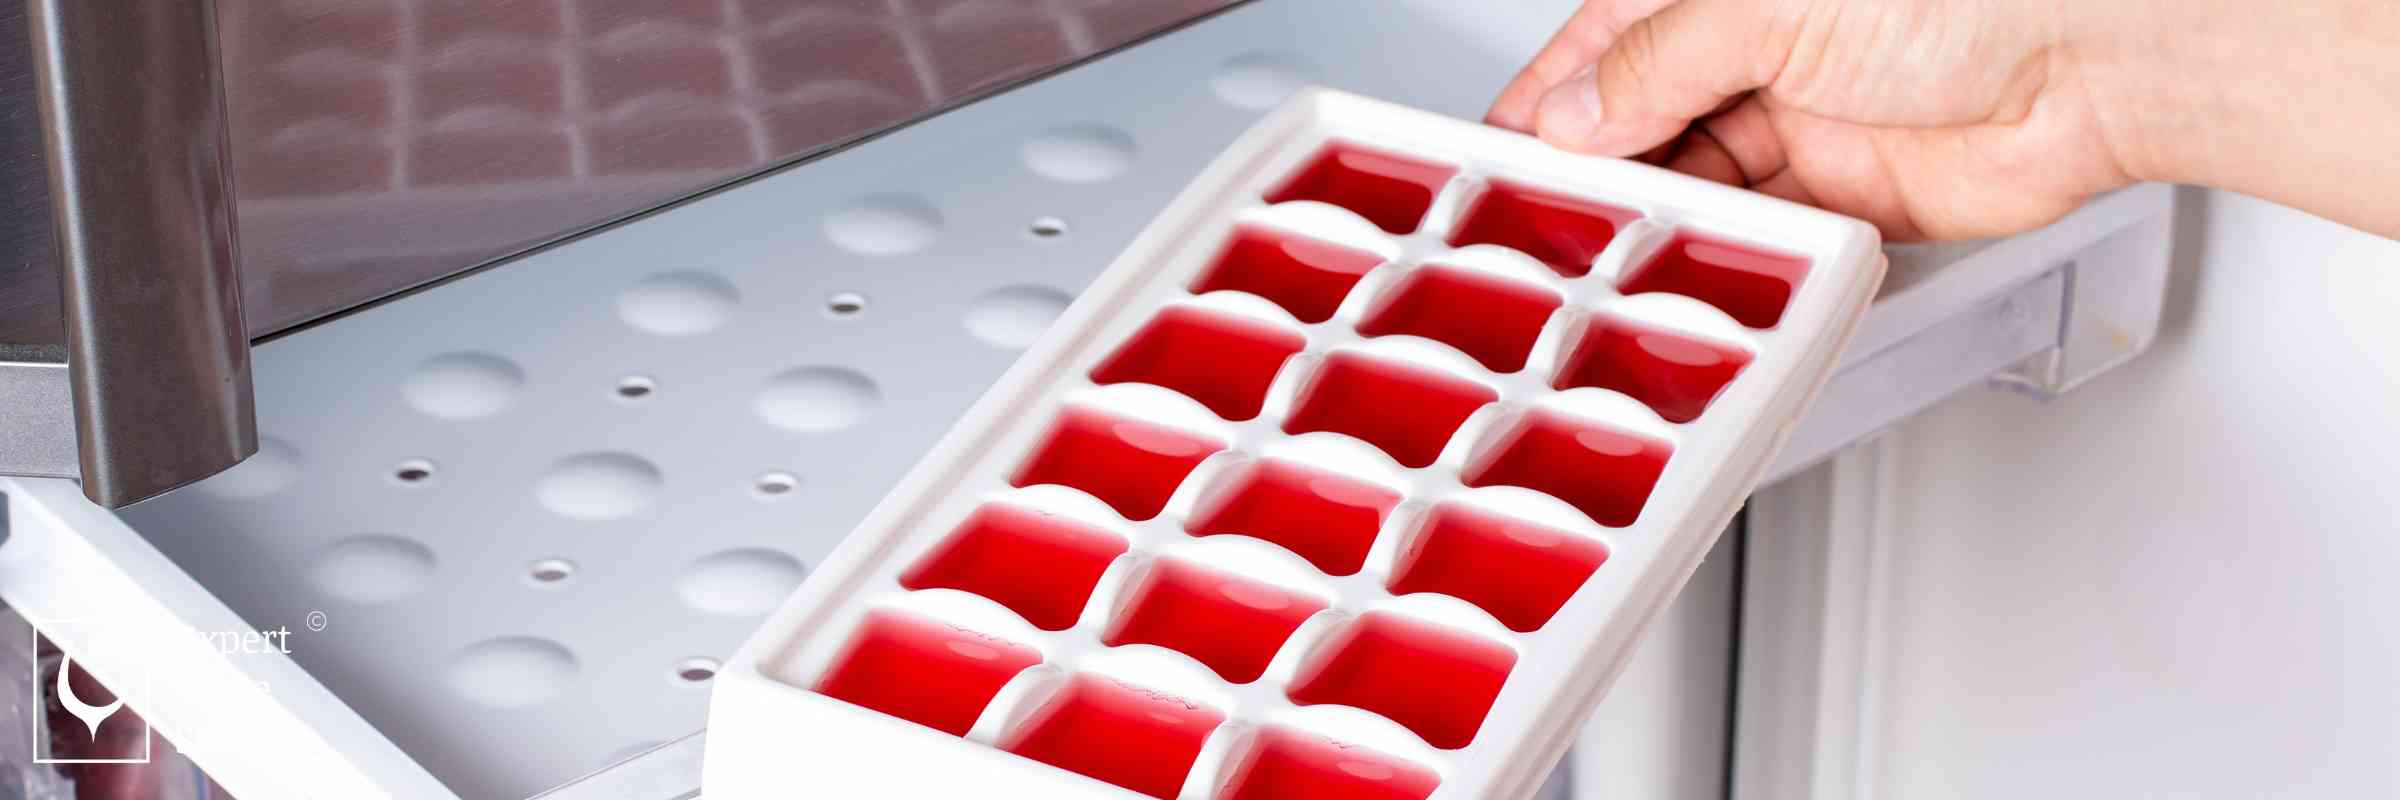 Making Mulled Wine Ice Cubes